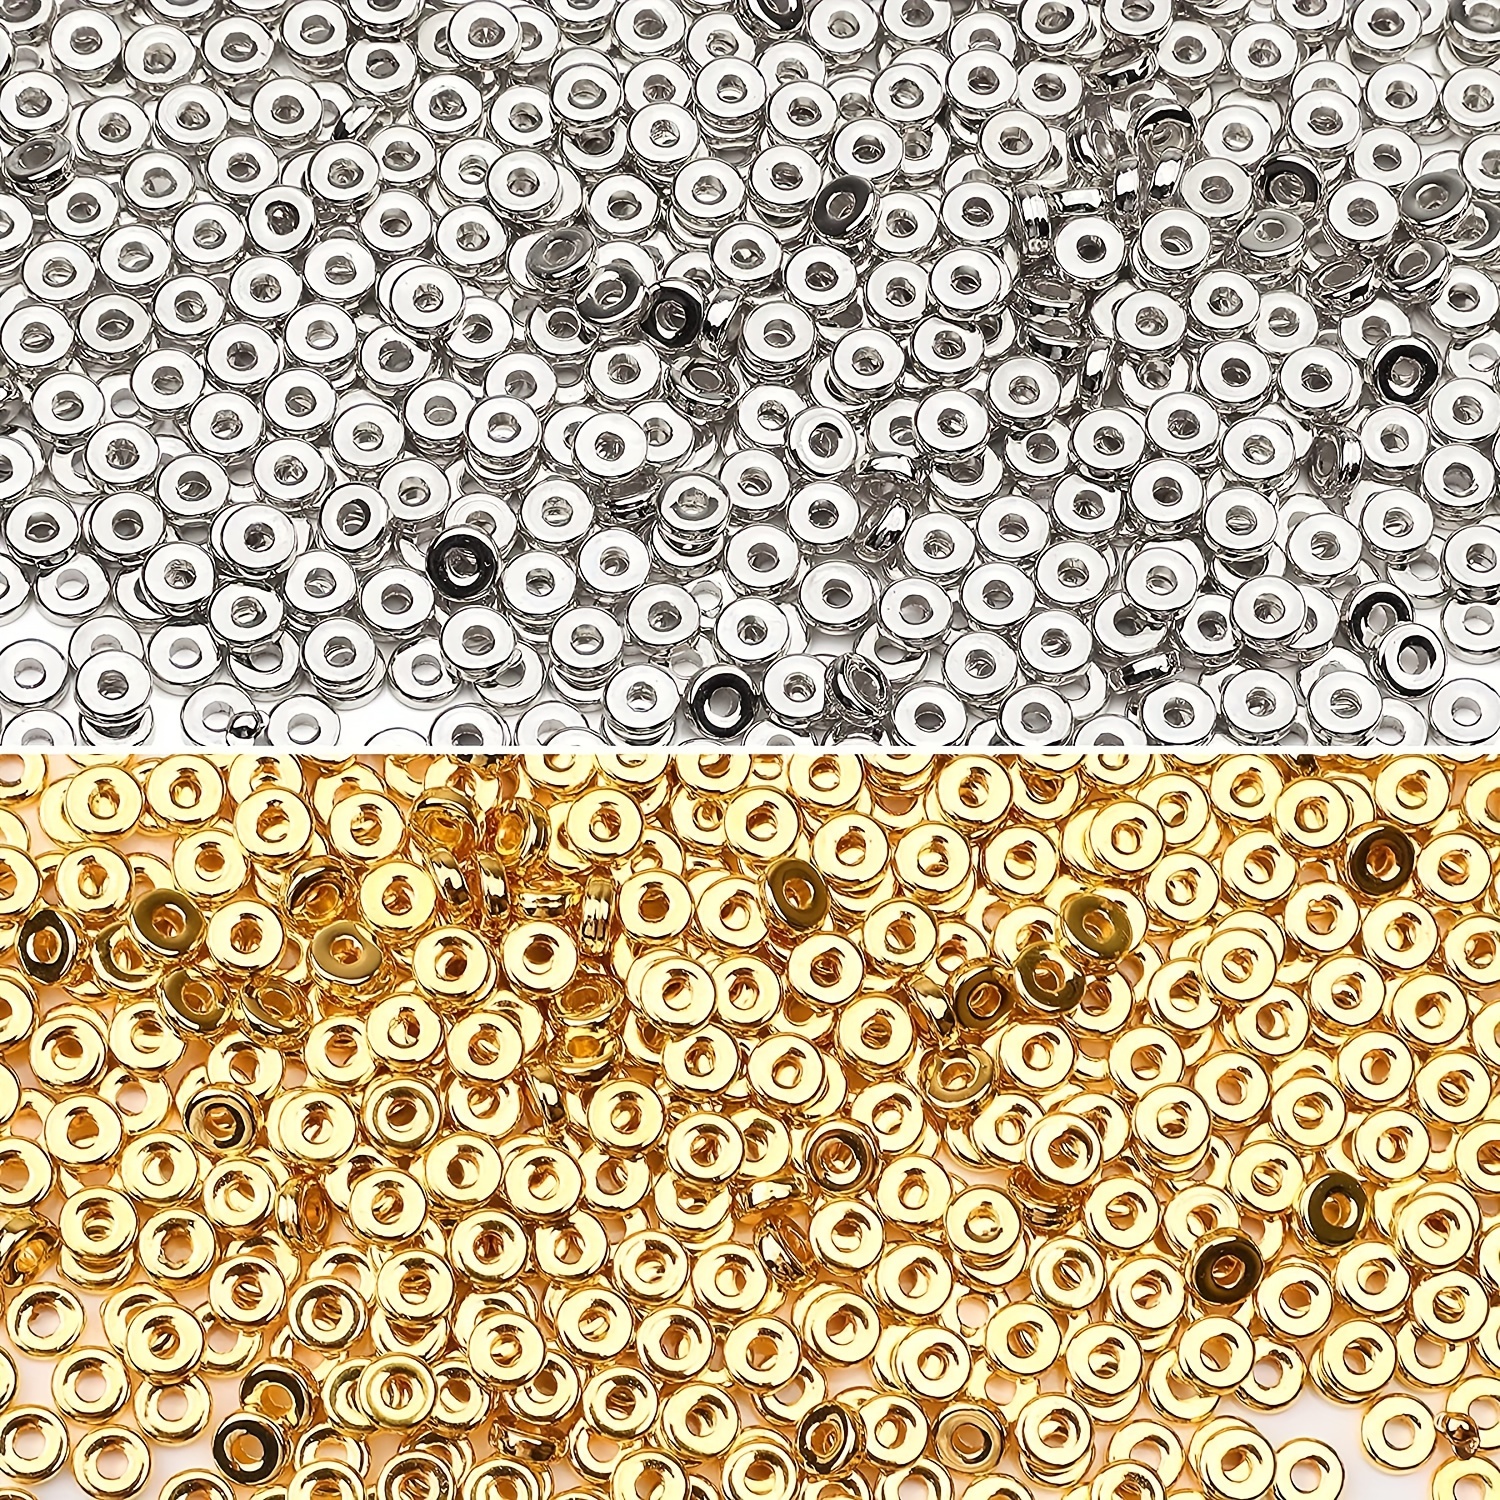 

1500pcs 6mm Golden & Silvery Flat Round Spacer Beads Disc Loose Beads Fashion For Diy Bracelet Necklace Earrings Small Business Jewelry Making Craft Supplies